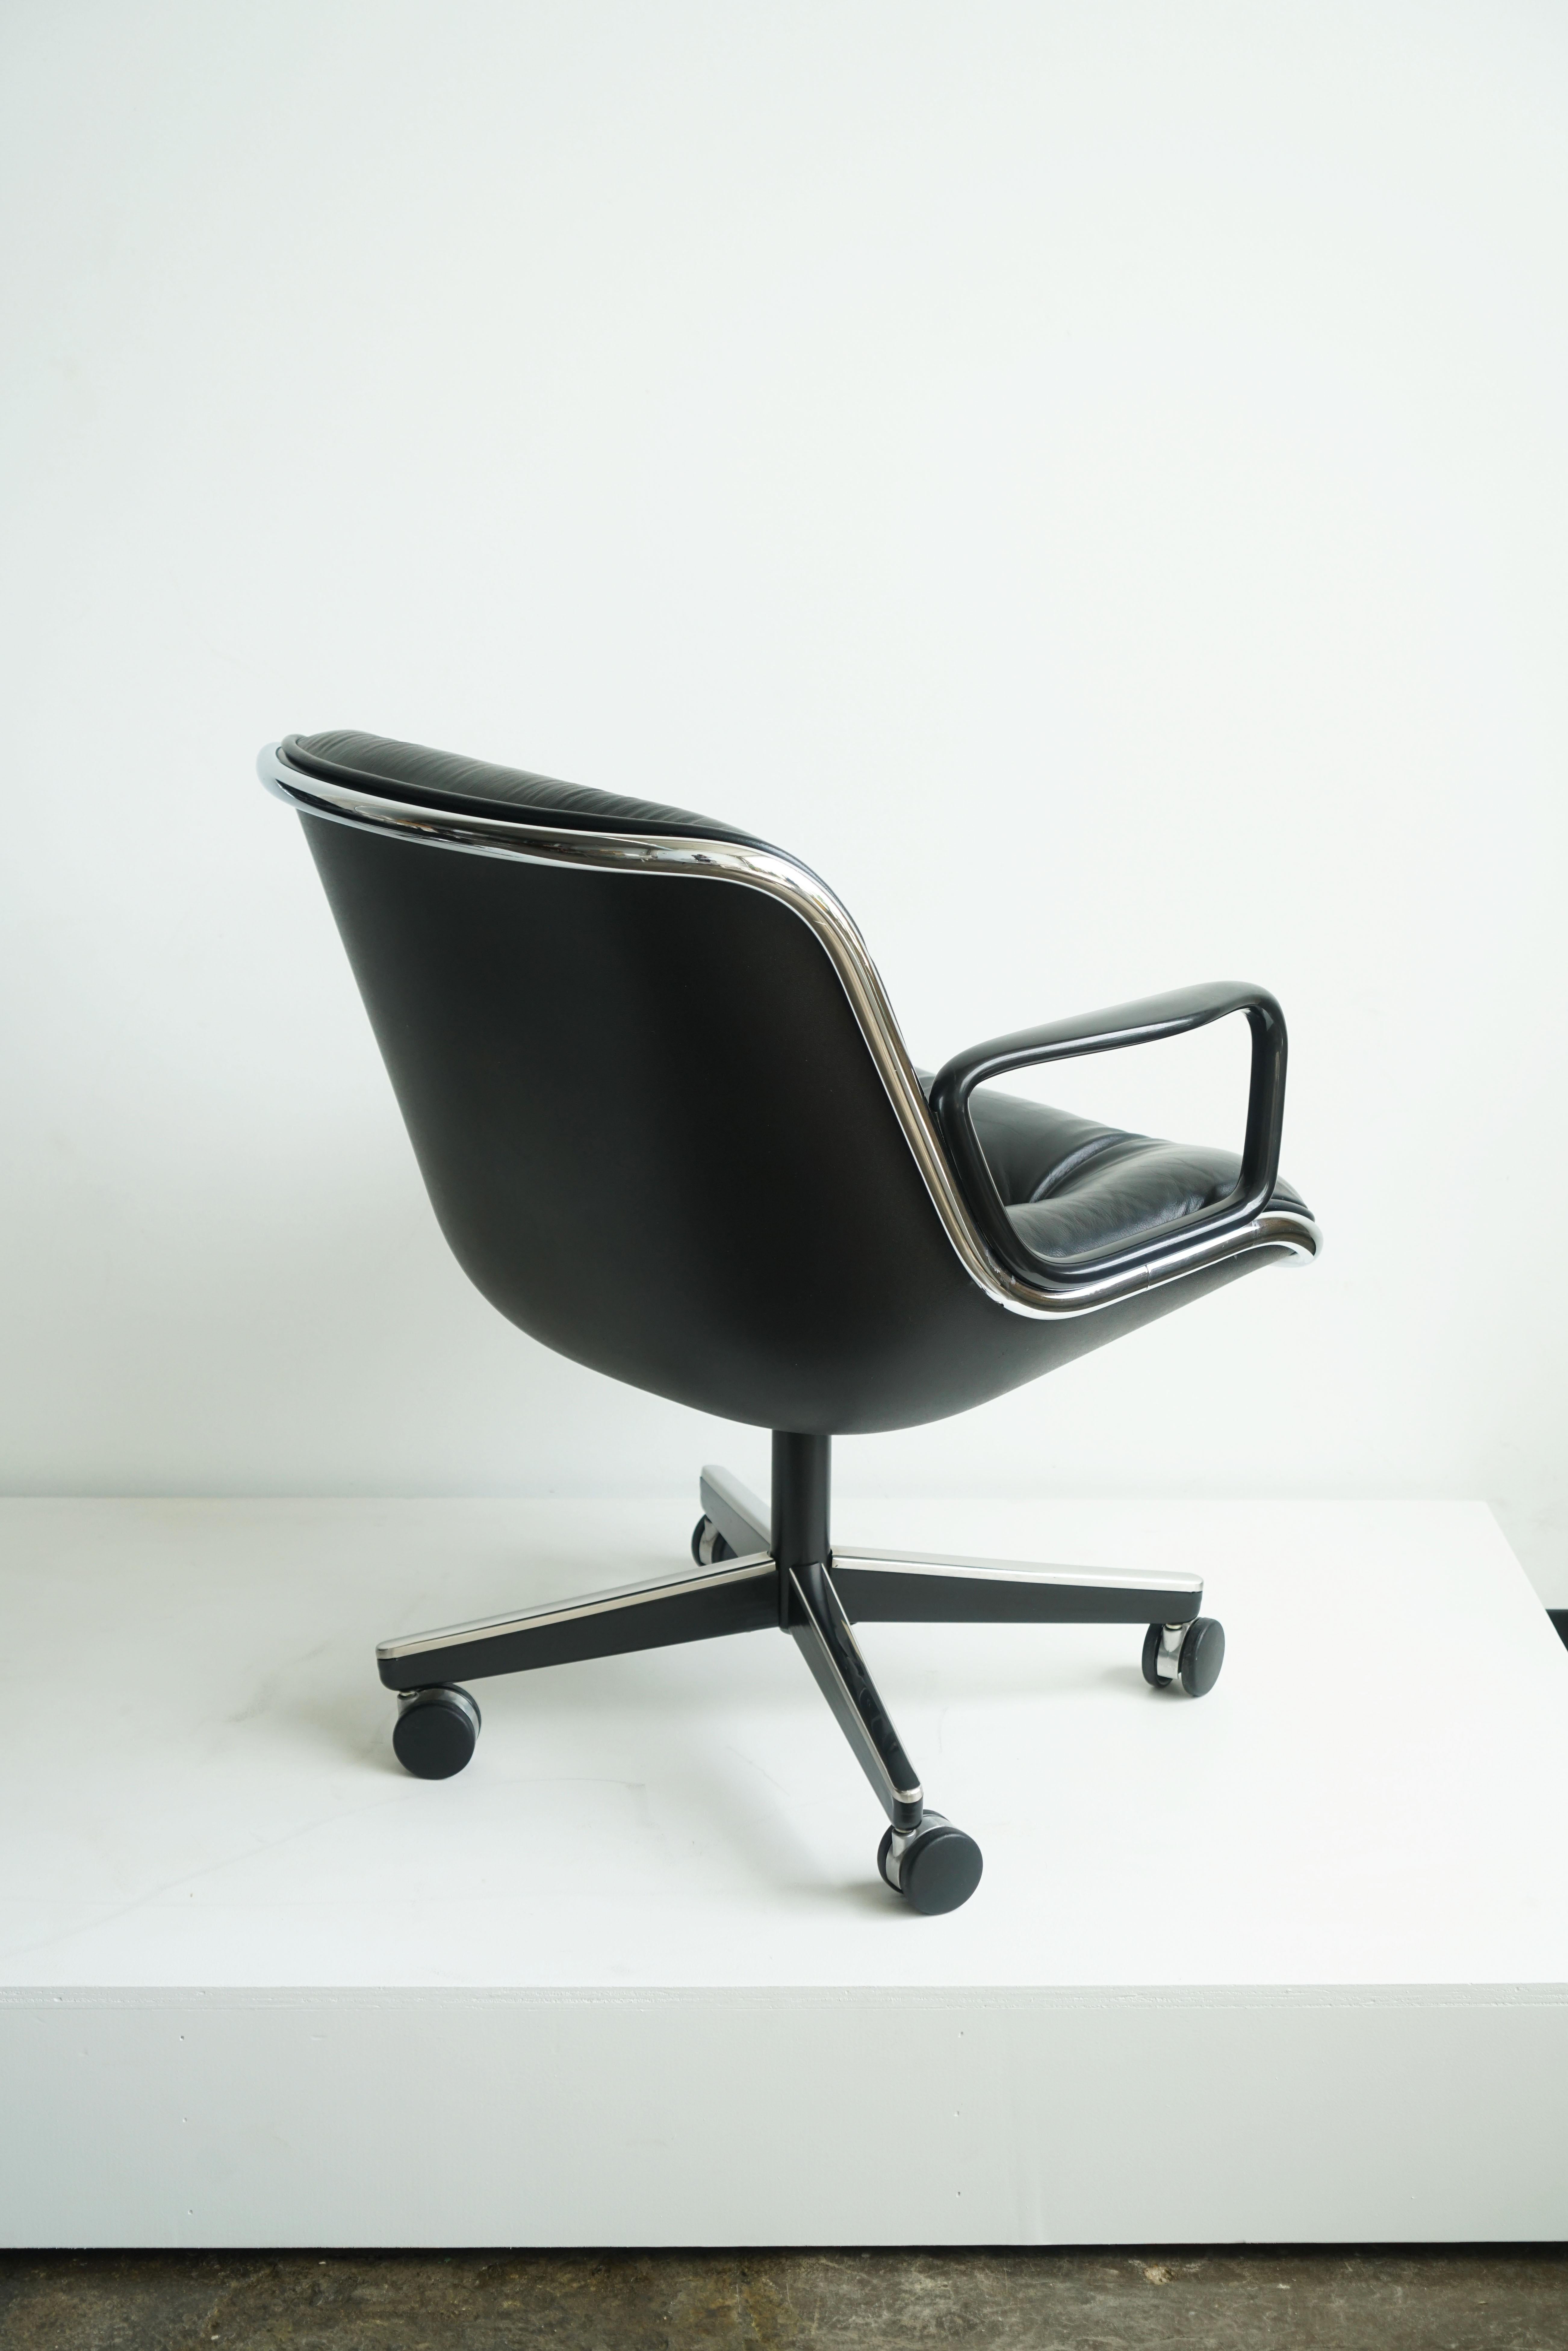 Late 20th Century Knoll Charles Pollock Executive Desk Chairs in Black Leather For Sale